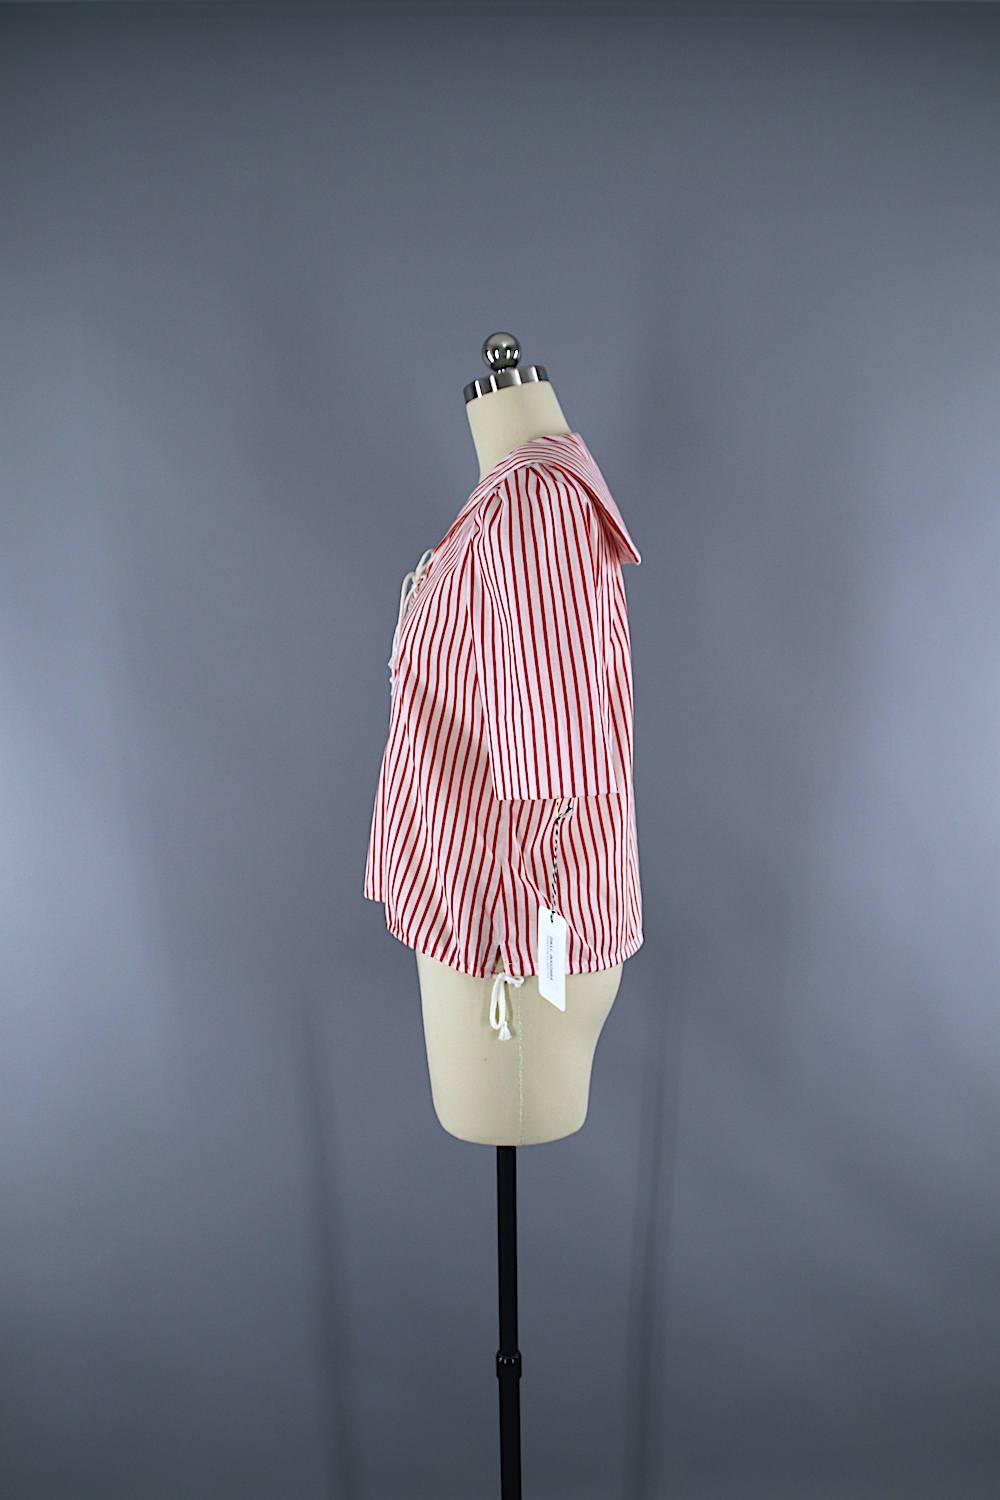 Vintage 1980s Red Striped Sailor Shirt / You Babes - ThisBlueBird